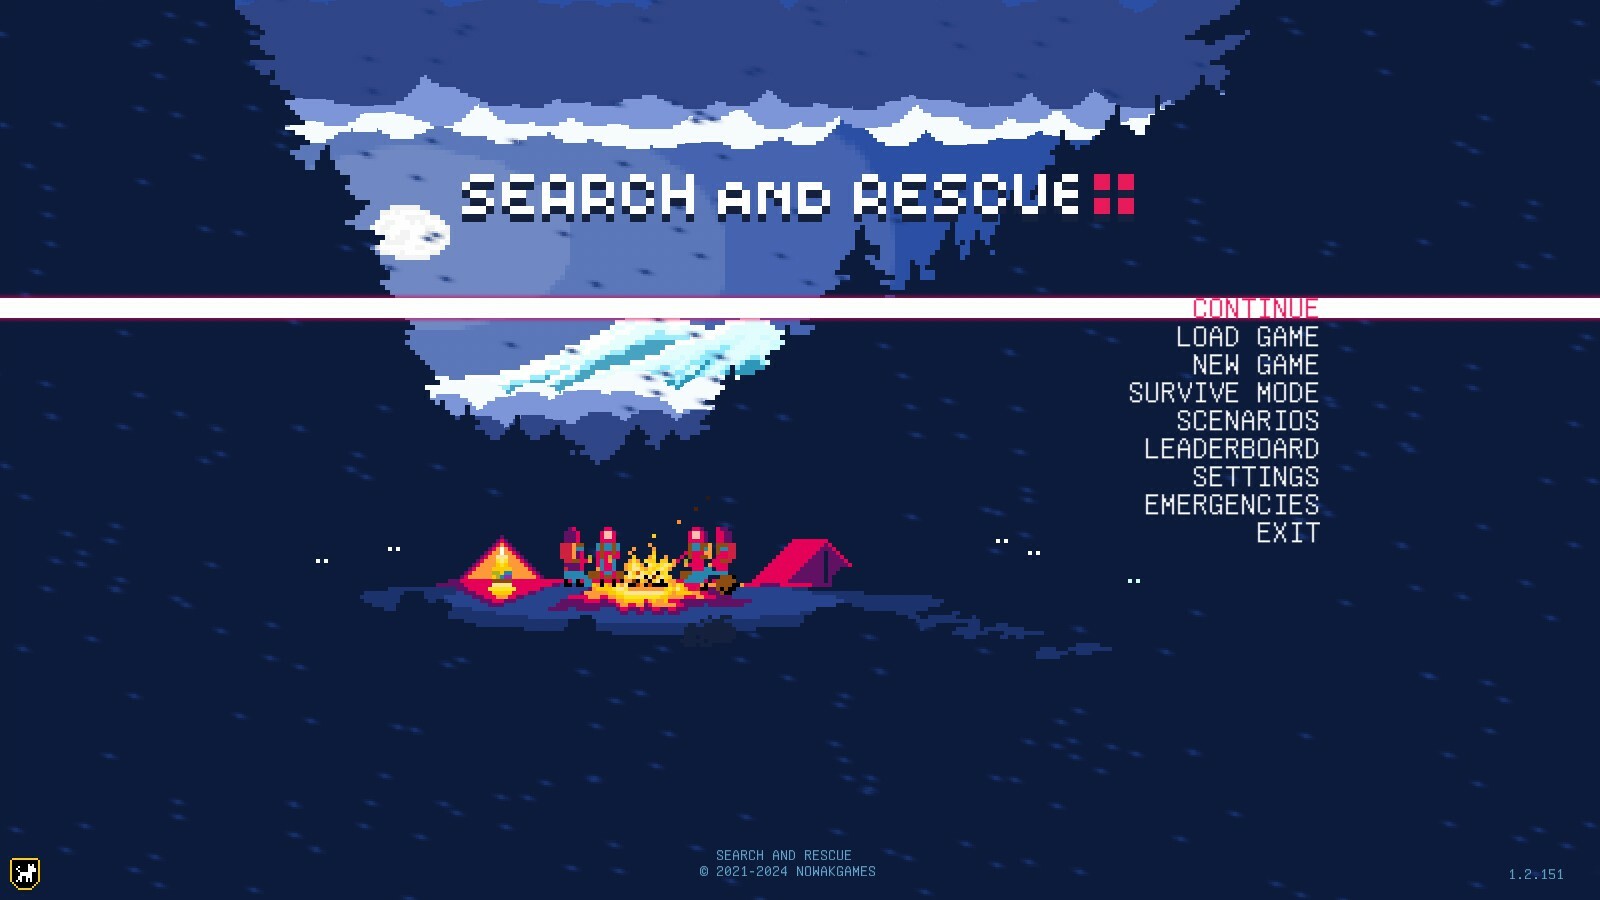 Search and Rescue Featured Screenshot #1